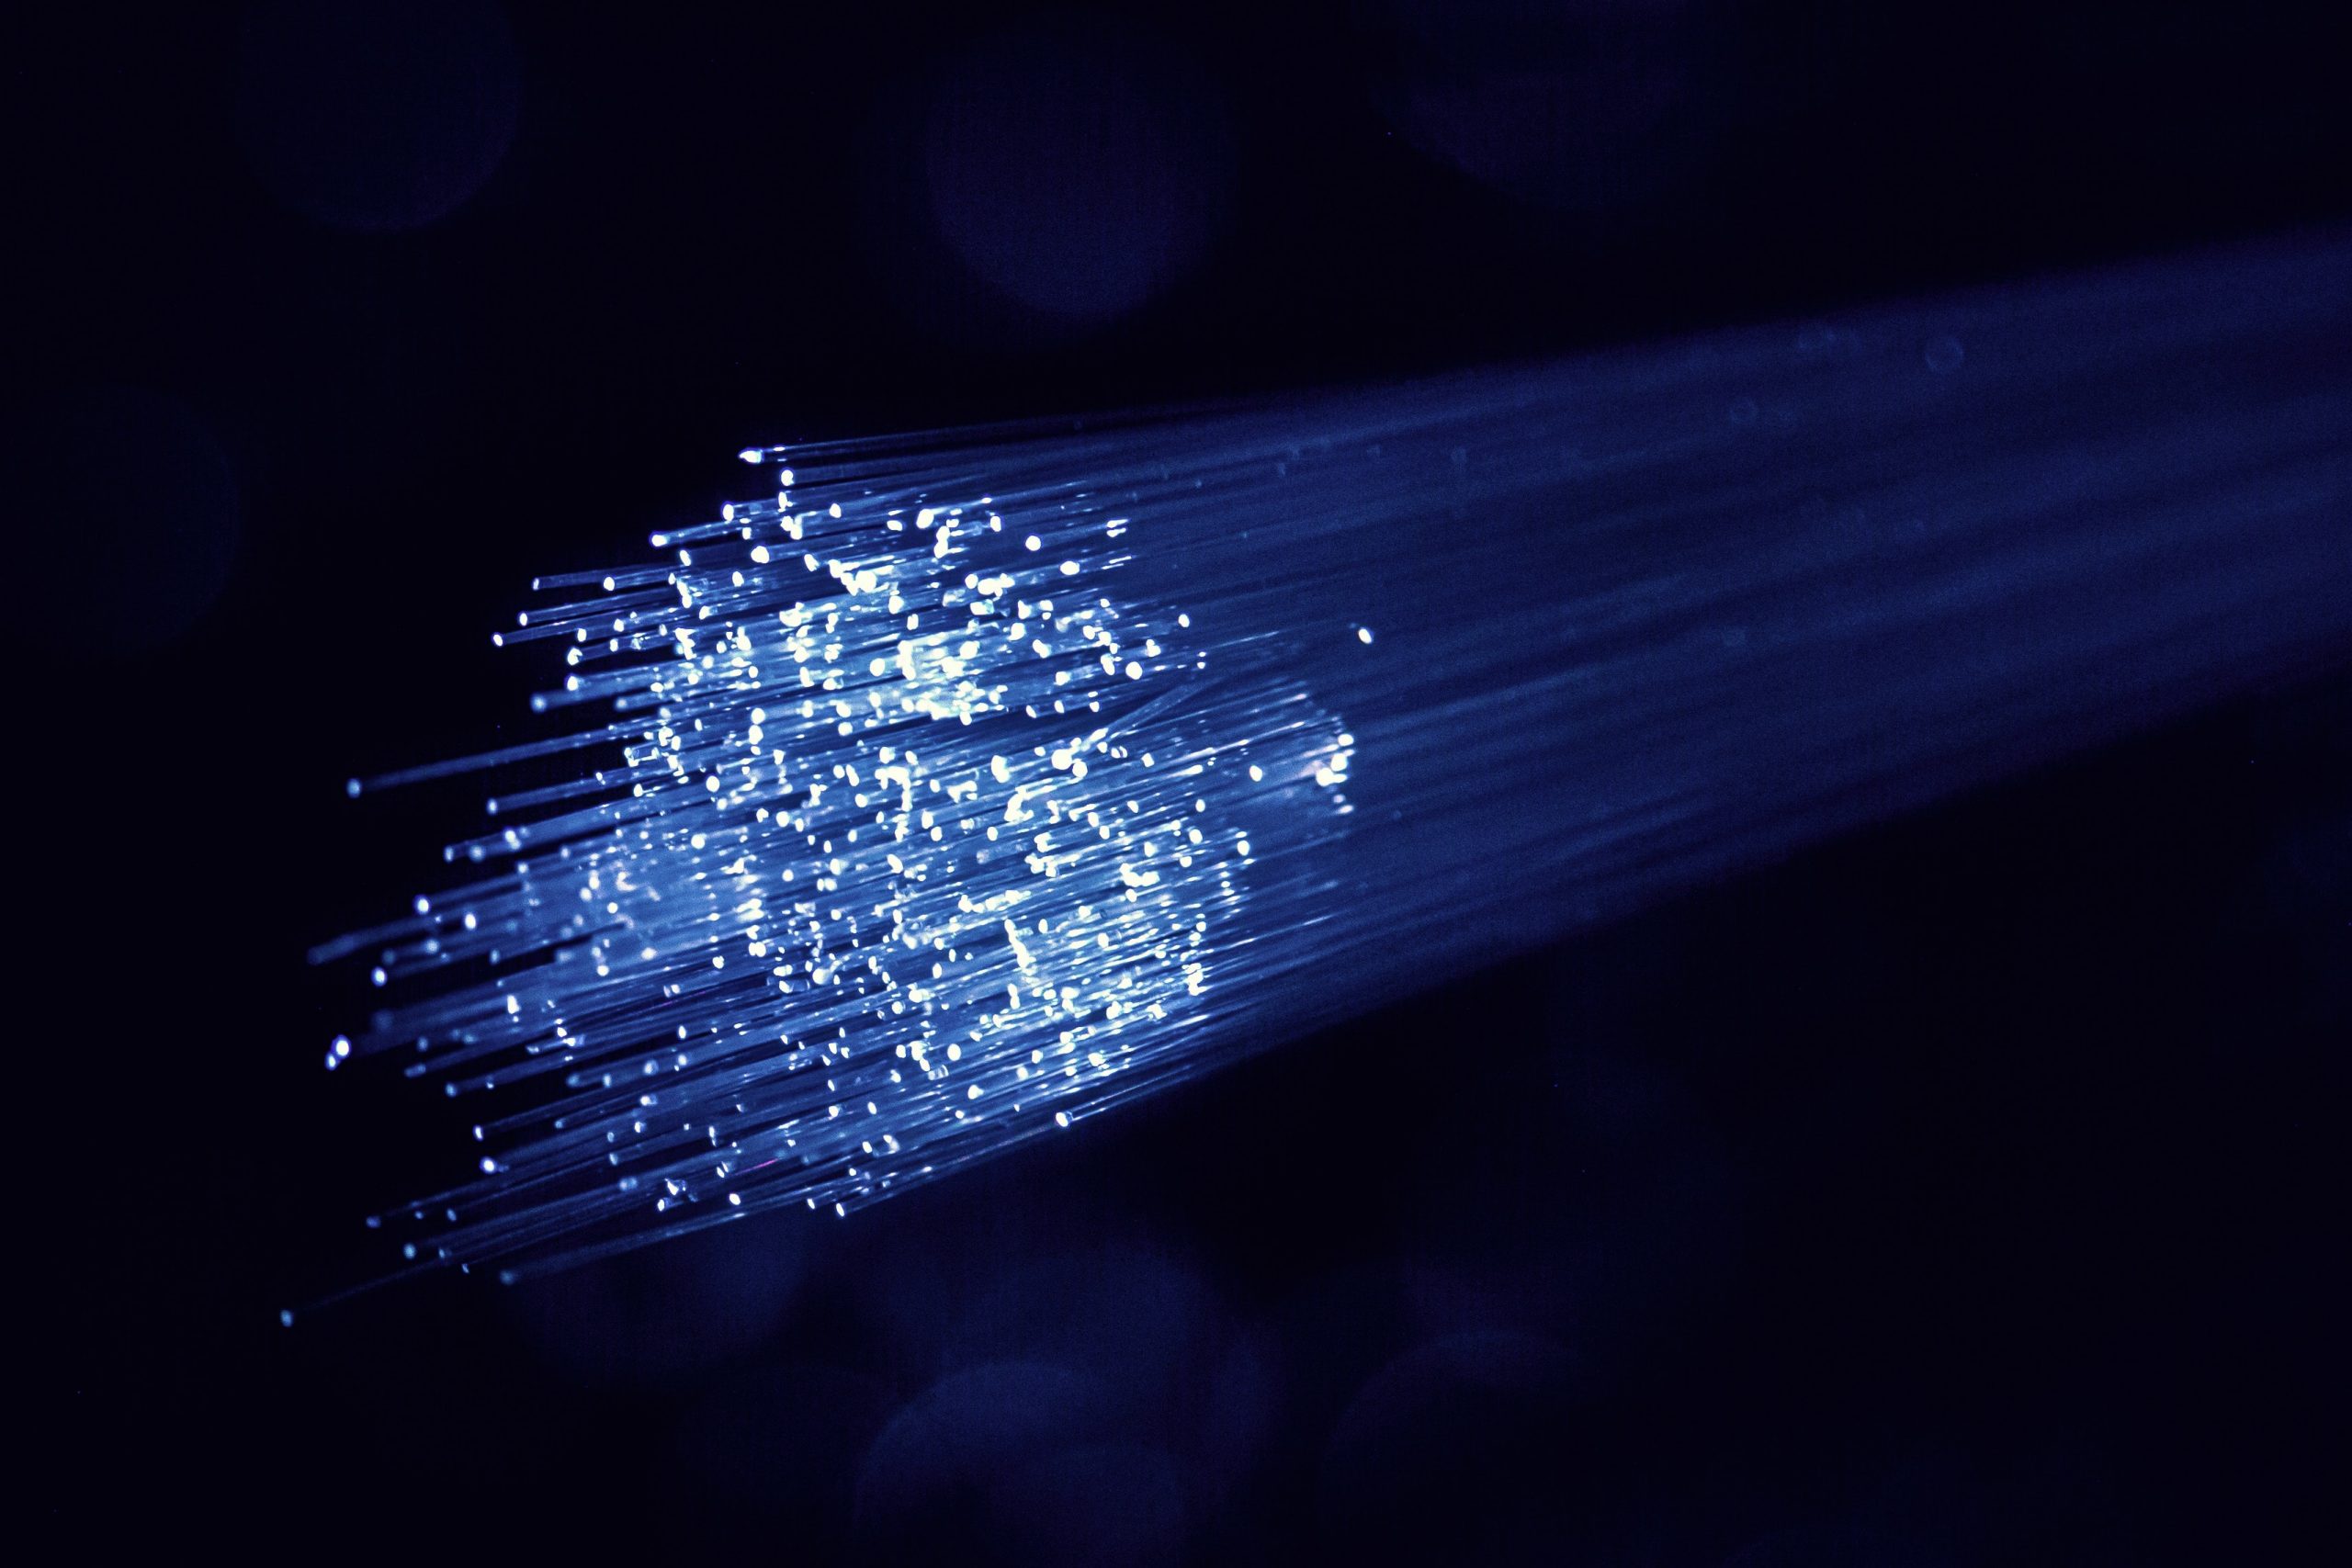 in article about peer to peer technology, fiber optic cables